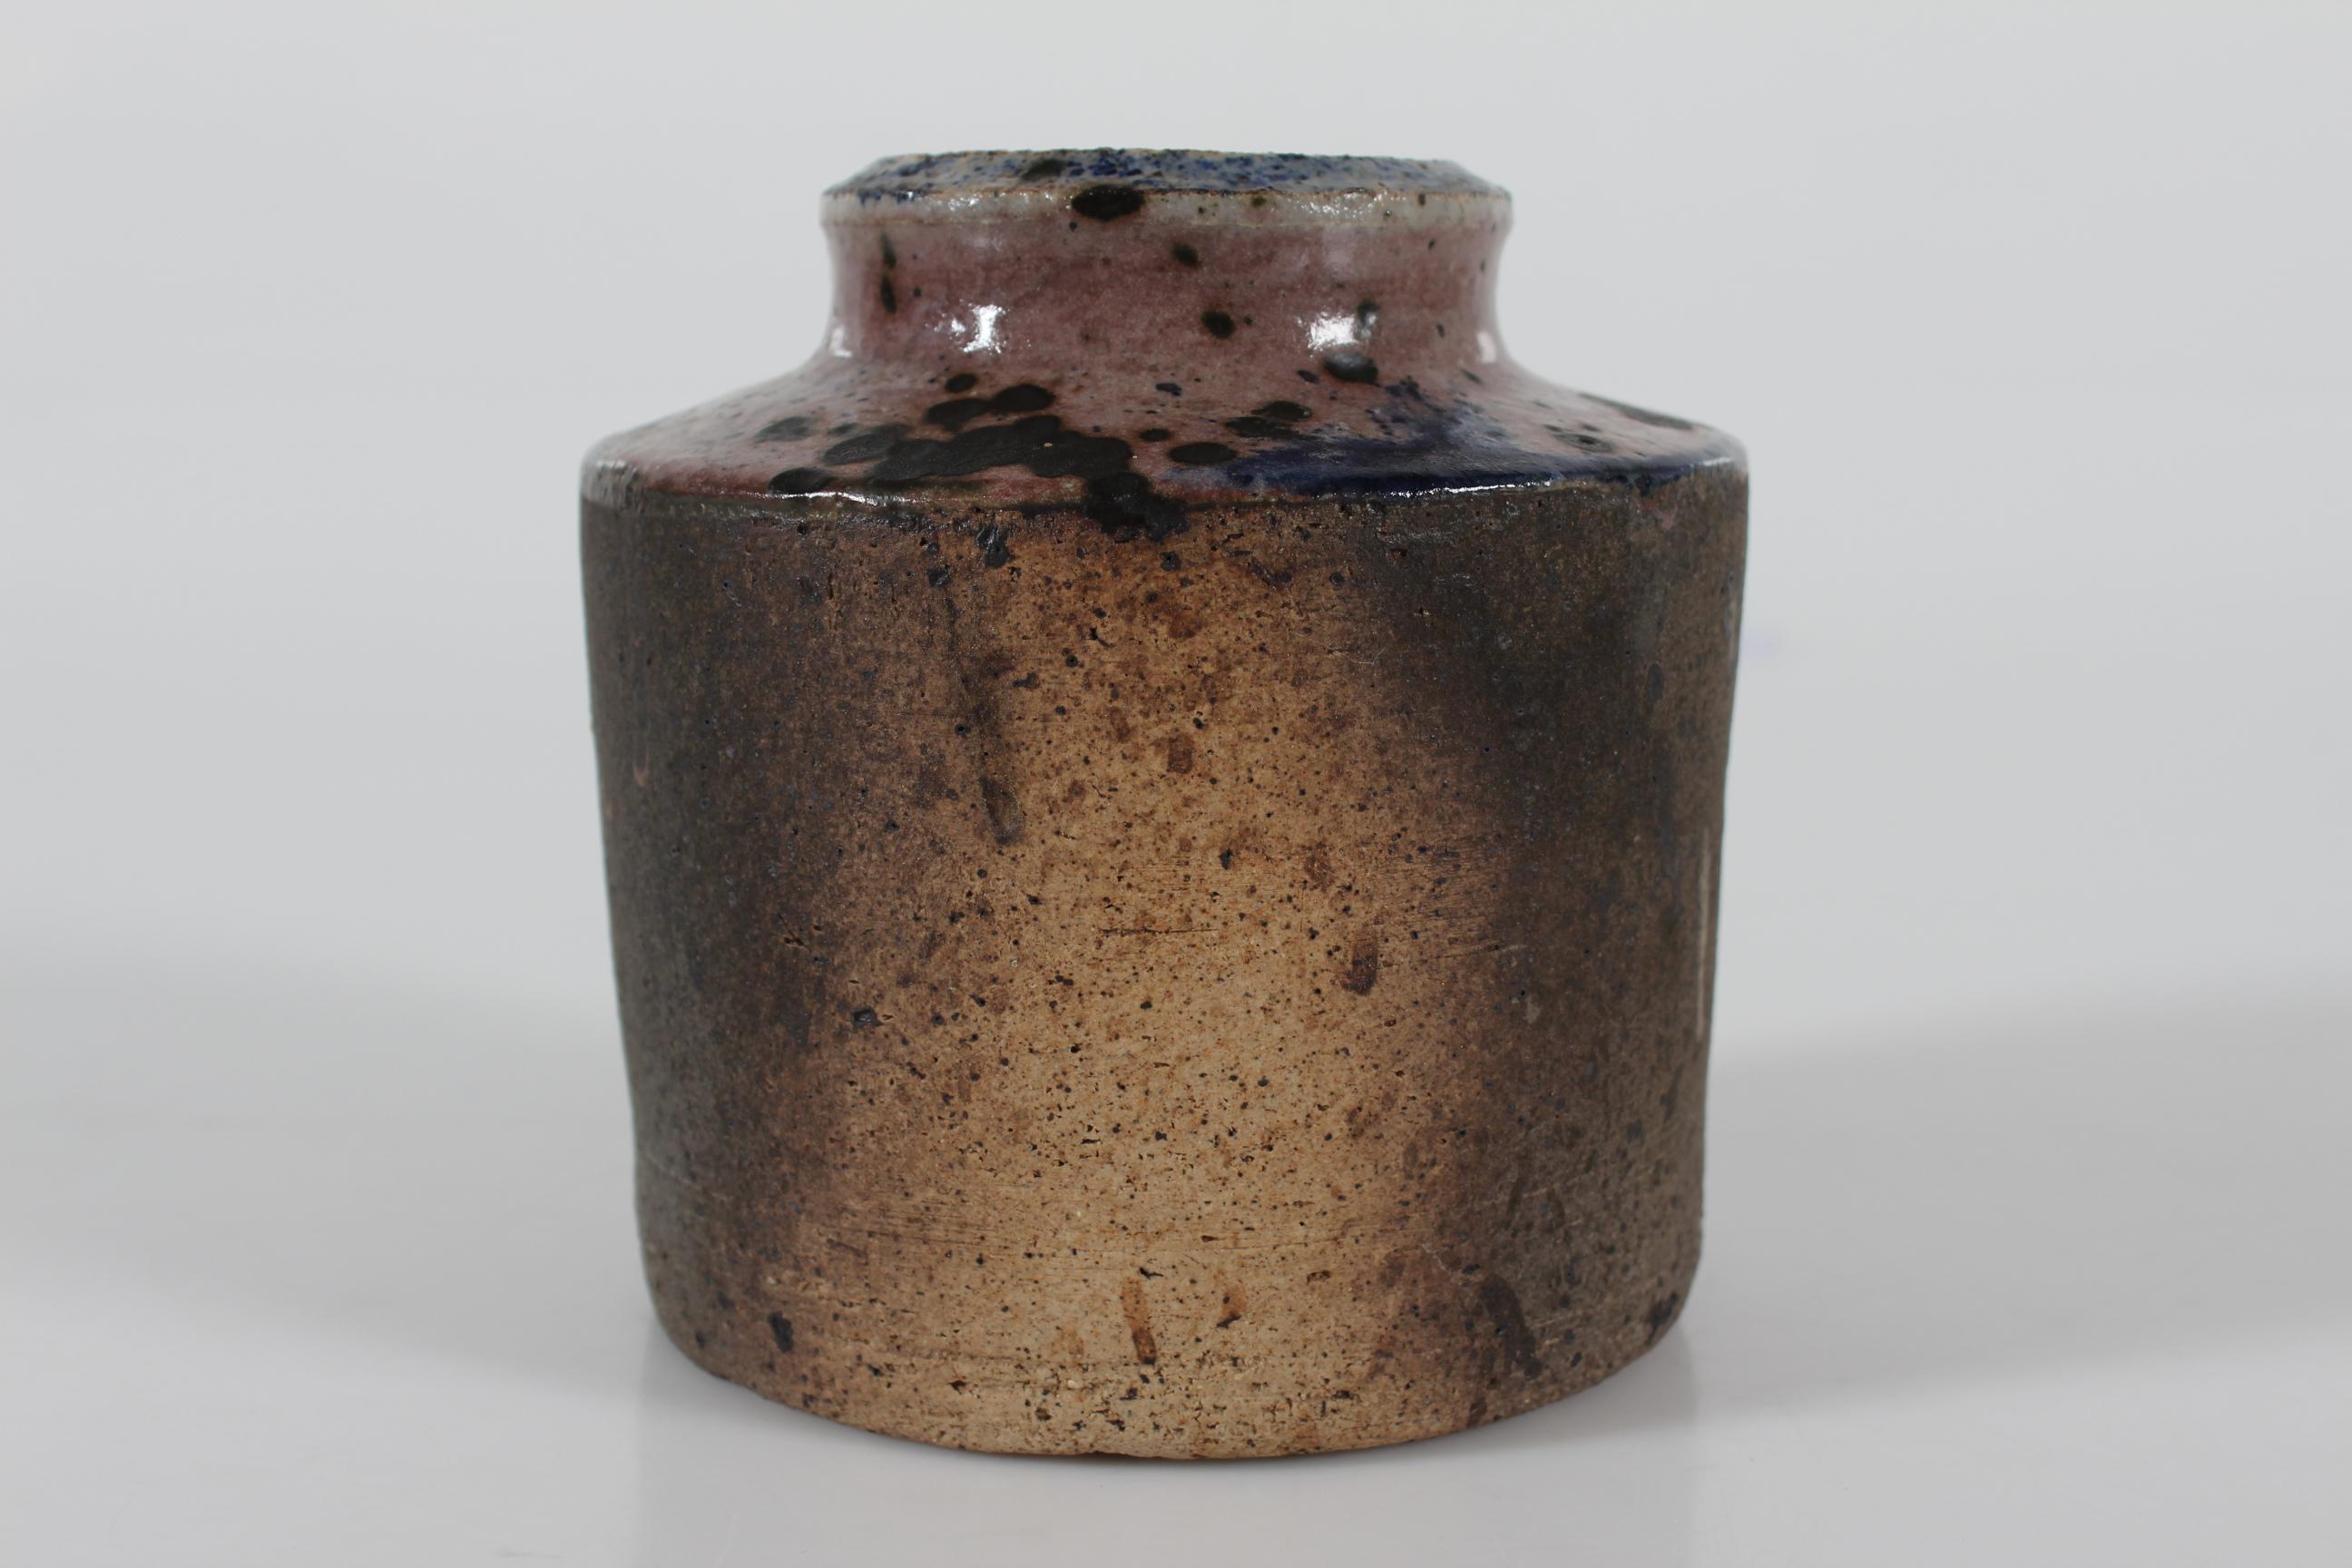 Stoneware Danish Studio Ceramic Vase by Chris Moes Earth Tones with Speckles, 1970s For Sale